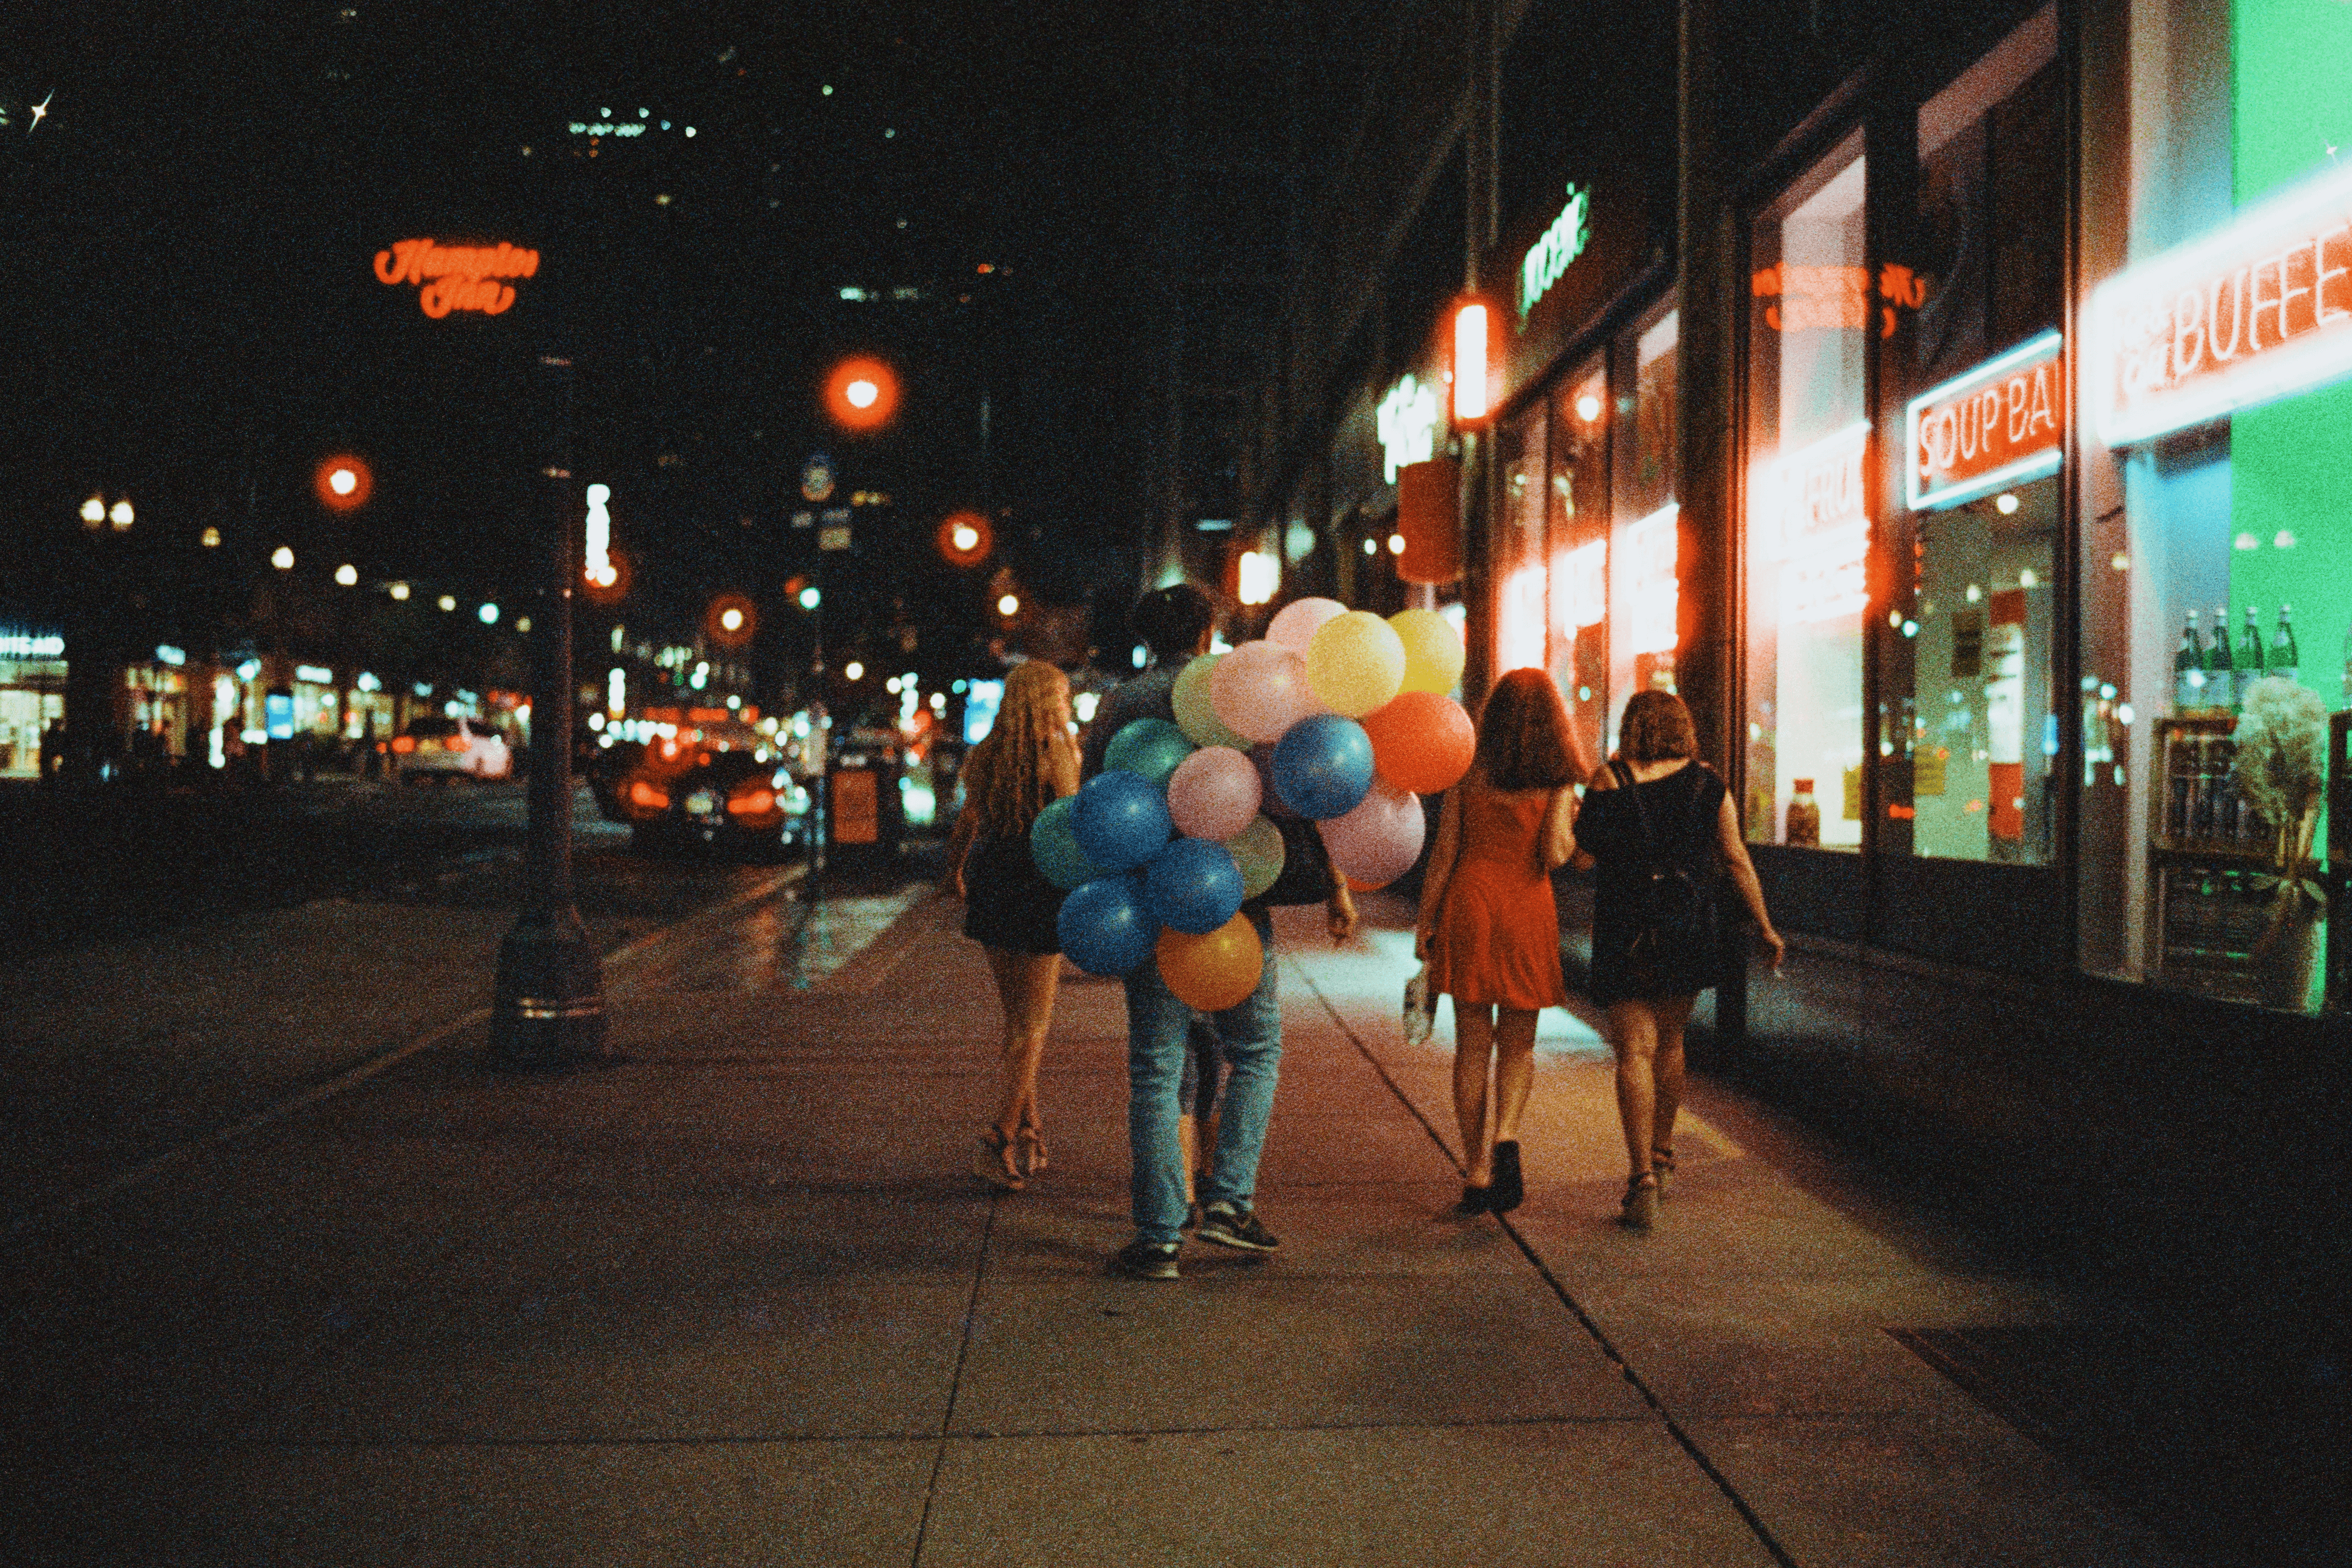 Balloons and Memories